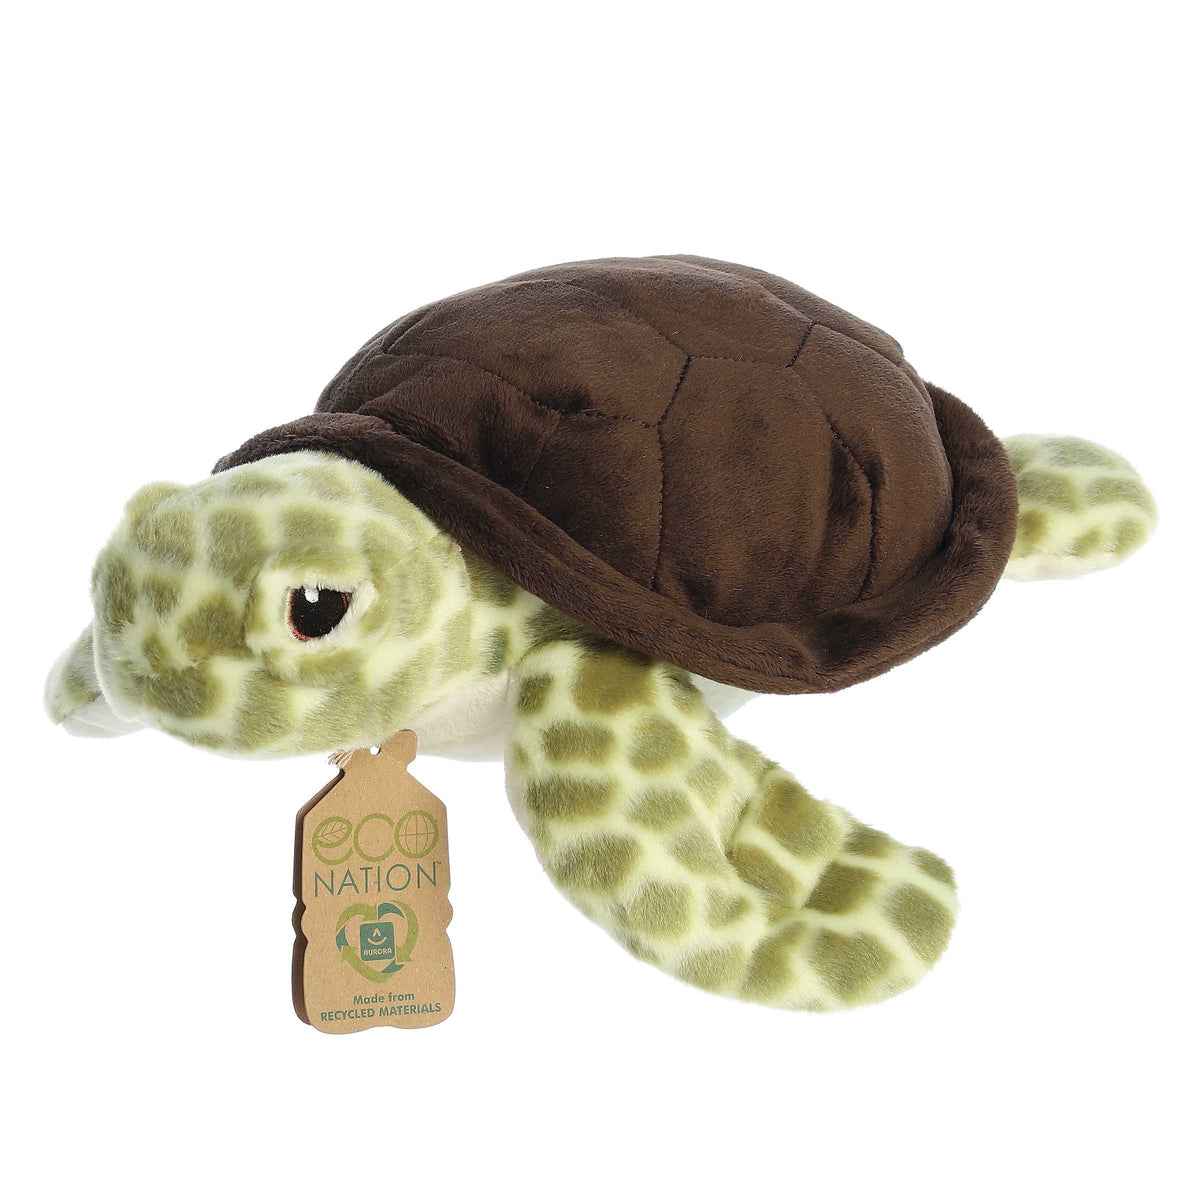 Aurora Eco Hugs Sea Turtle Plush, soft with a distinct shell, made from recycled plastics, featuring an Eco Nation hang tag.